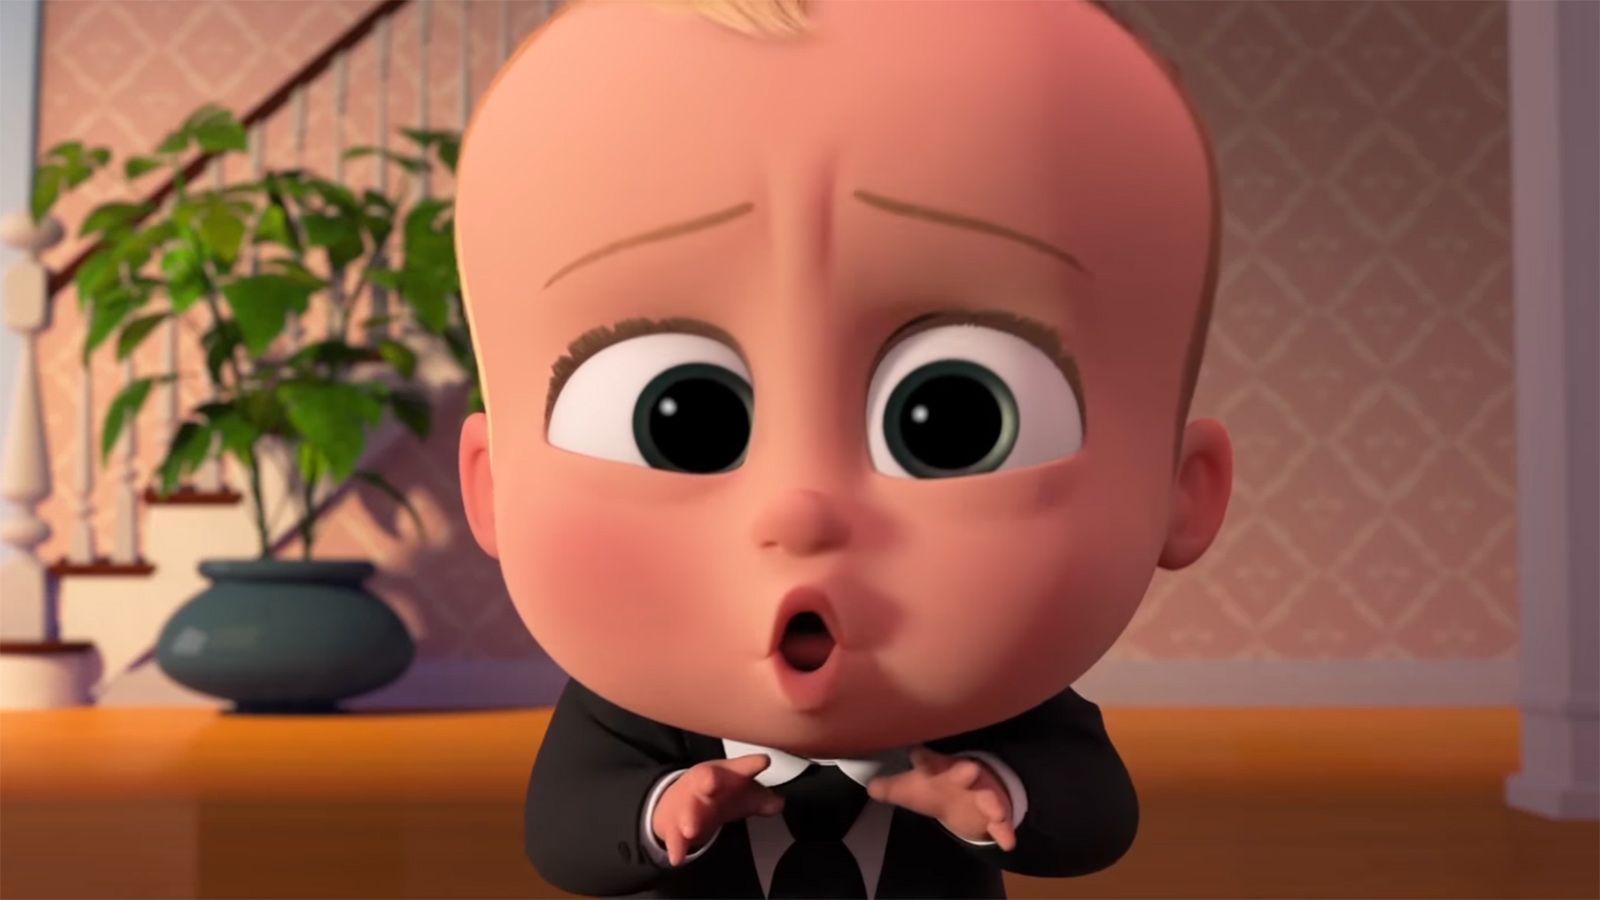 South Africa's box office: Boss Baby is boss, baby